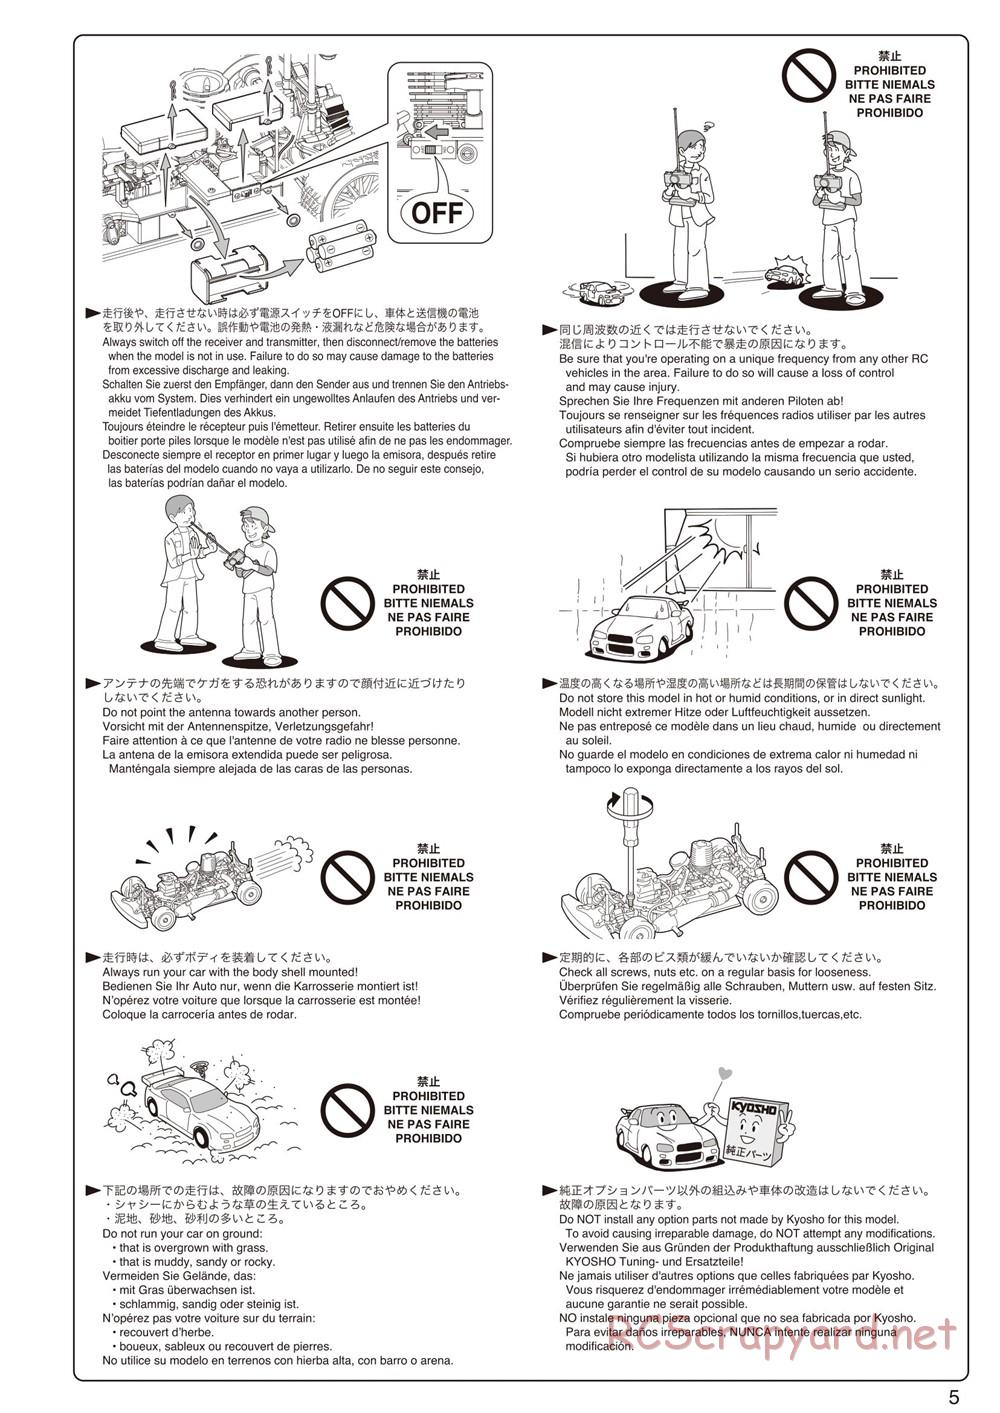 Kyosho - DRX - Manual - Page 5